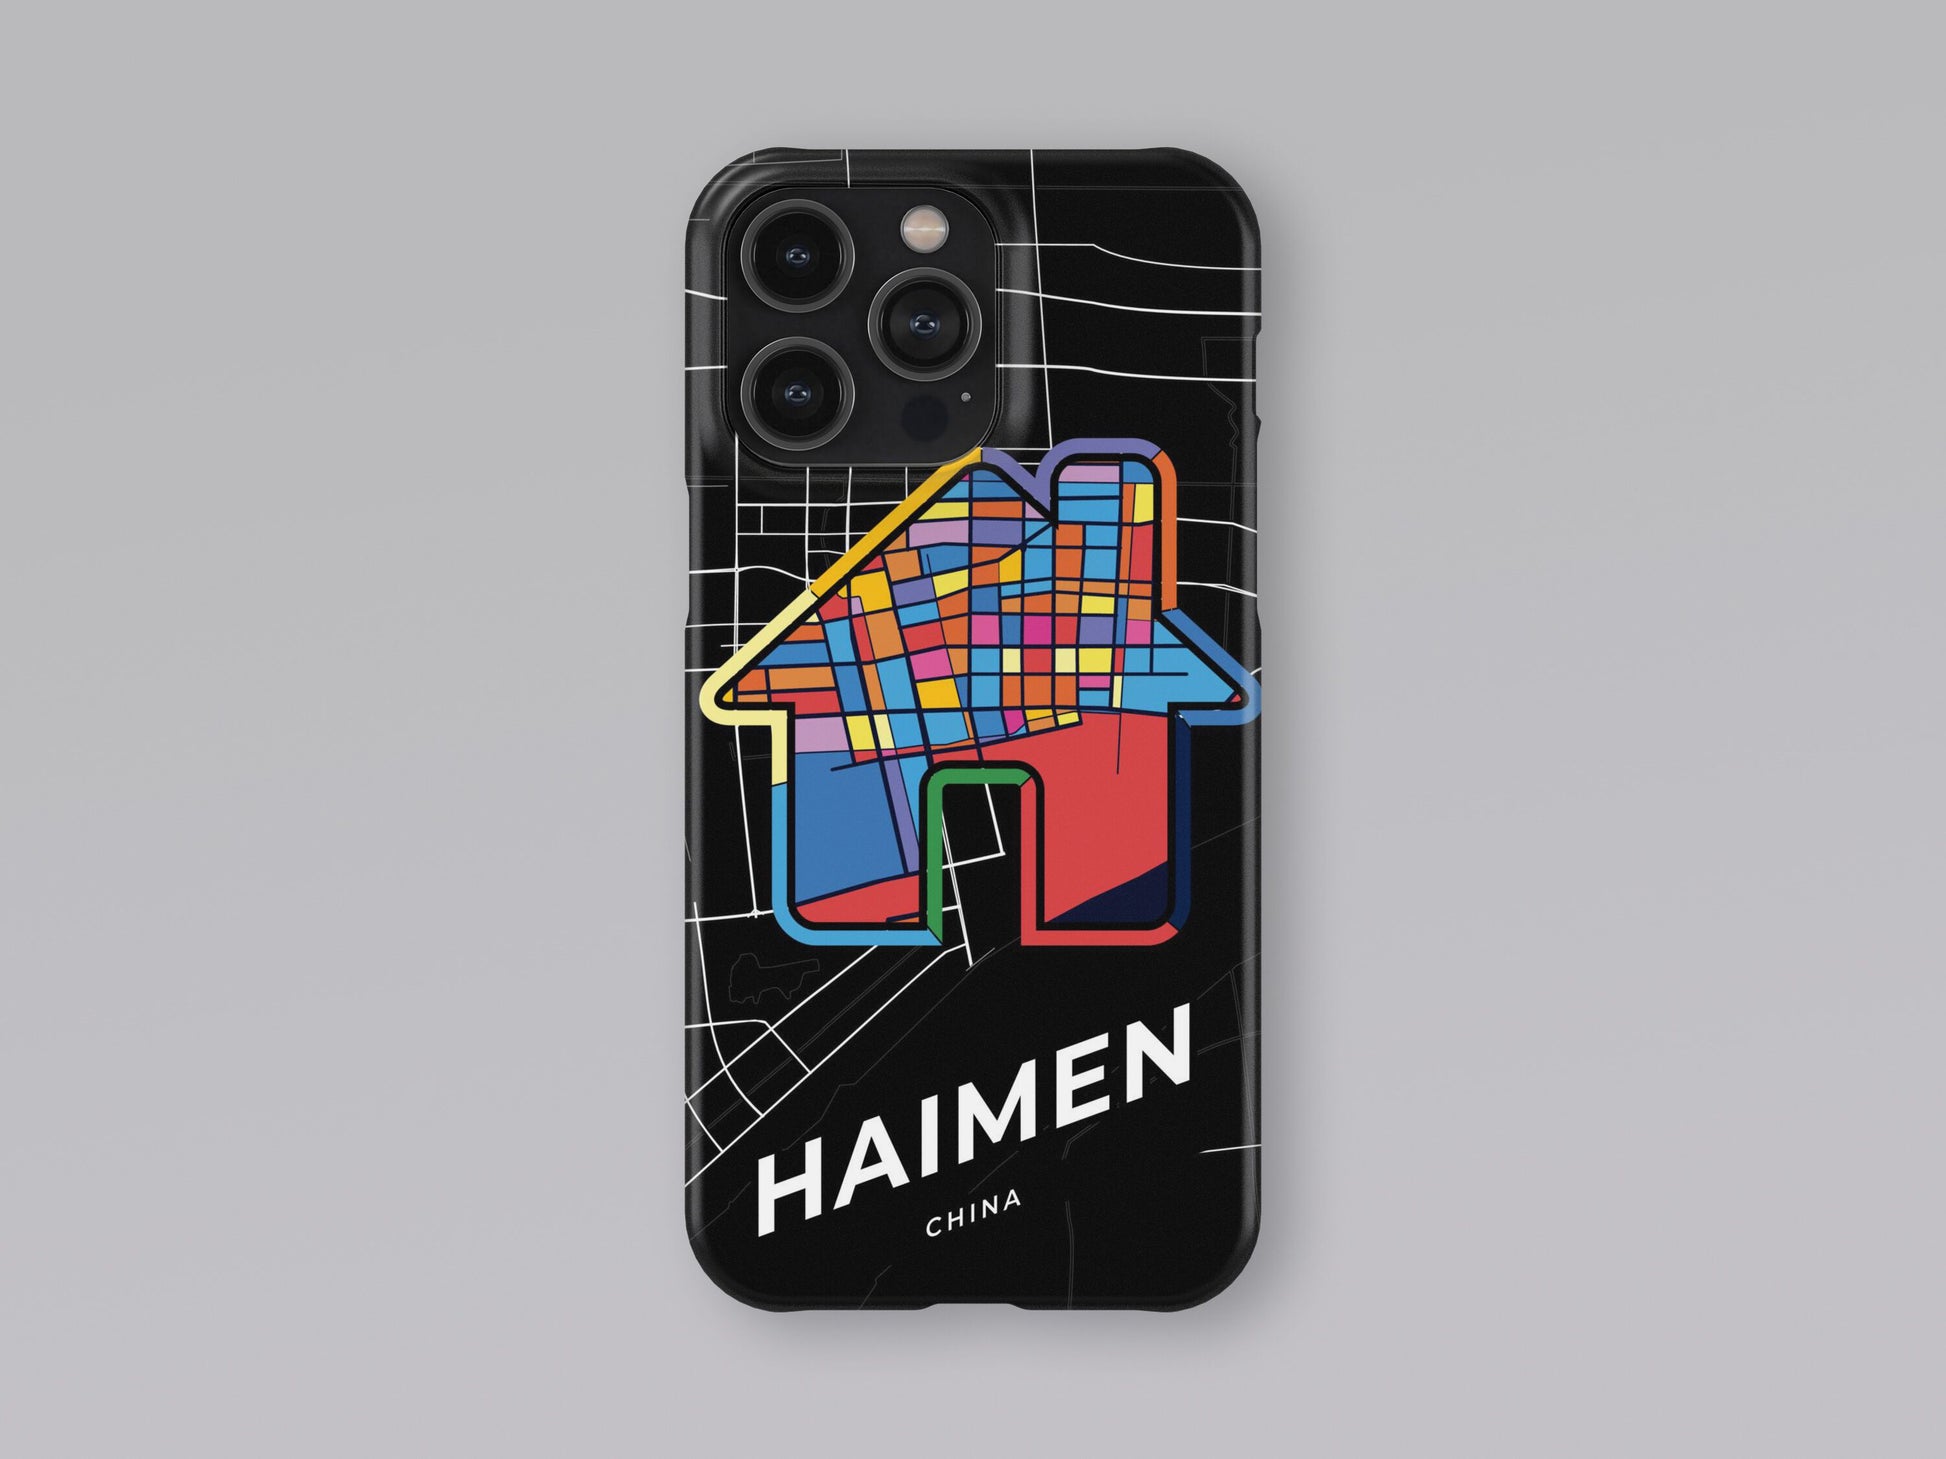 Haimen China slim phone case with colorful icon. Birthday, wedding or housewarming gift. Couple match cases. 3